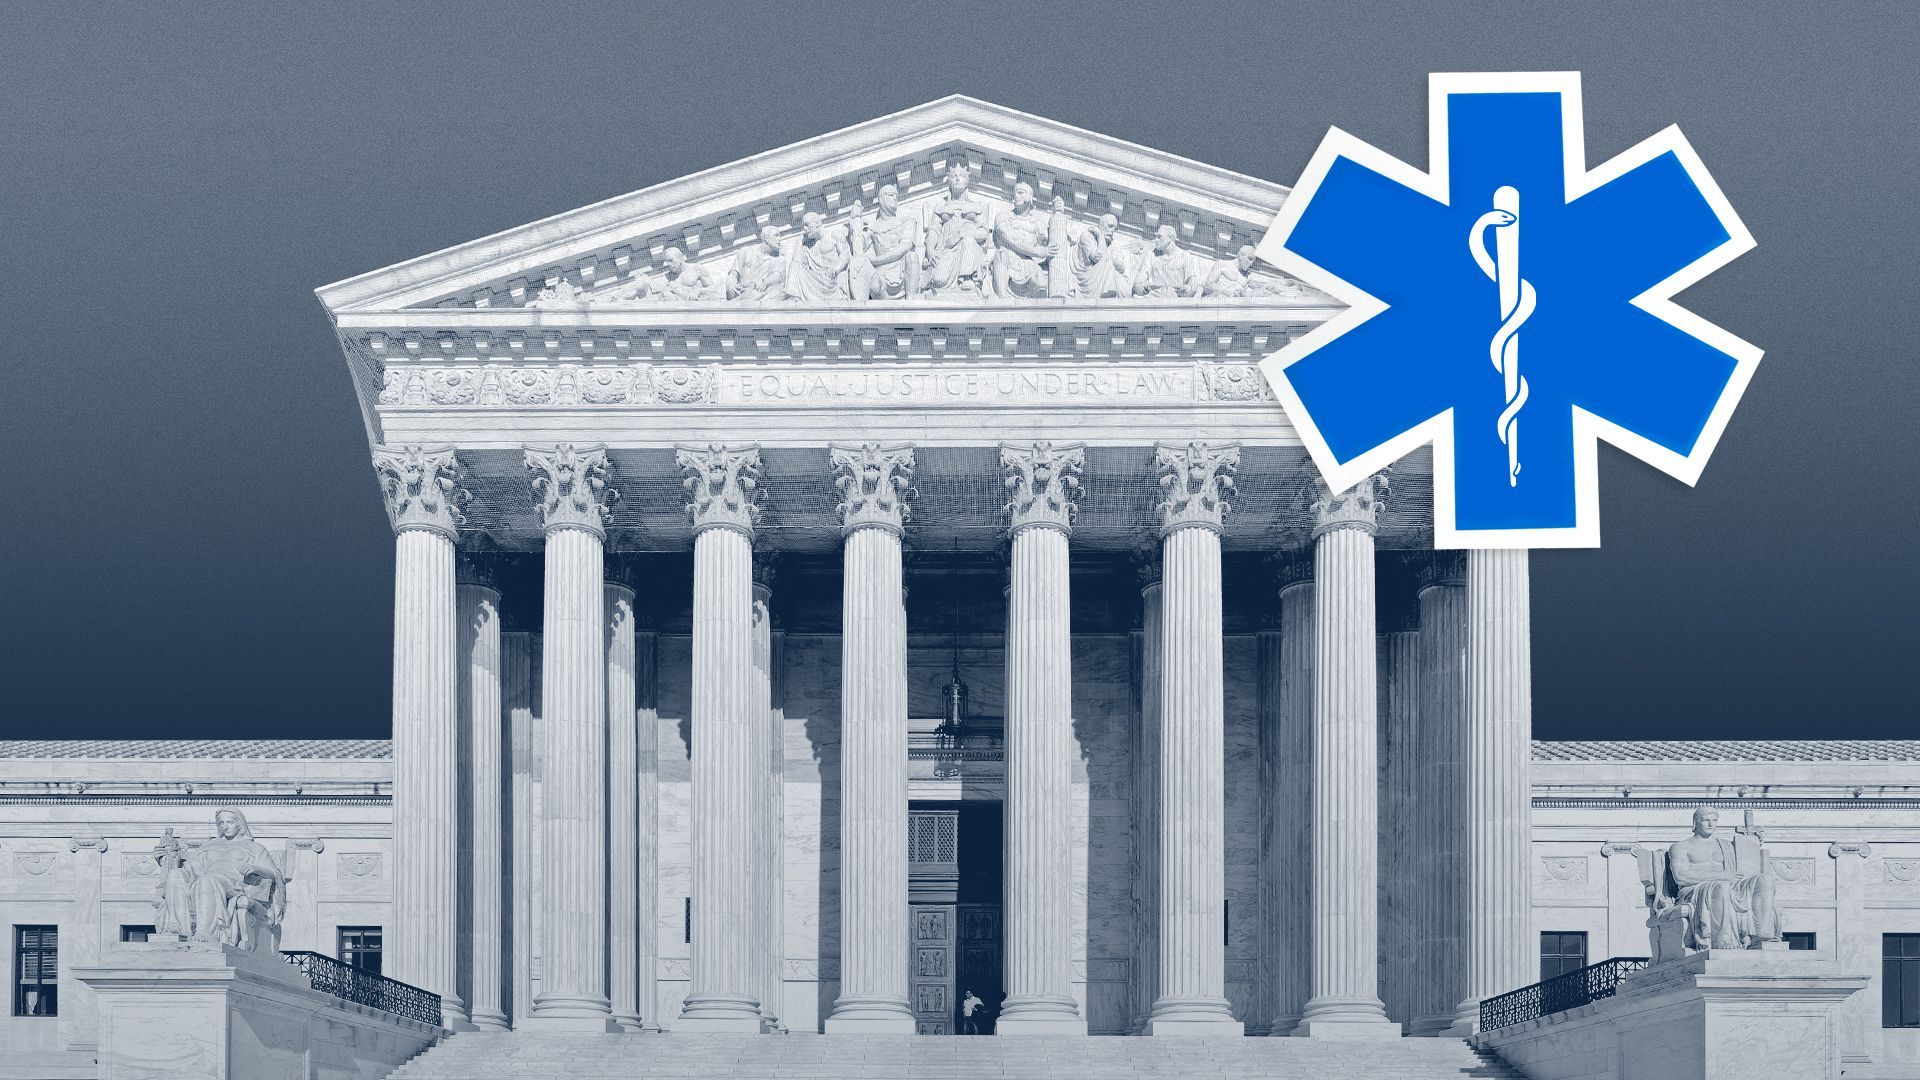 Illustration of the supreme court with an asterisk made of the ambulance symbol.